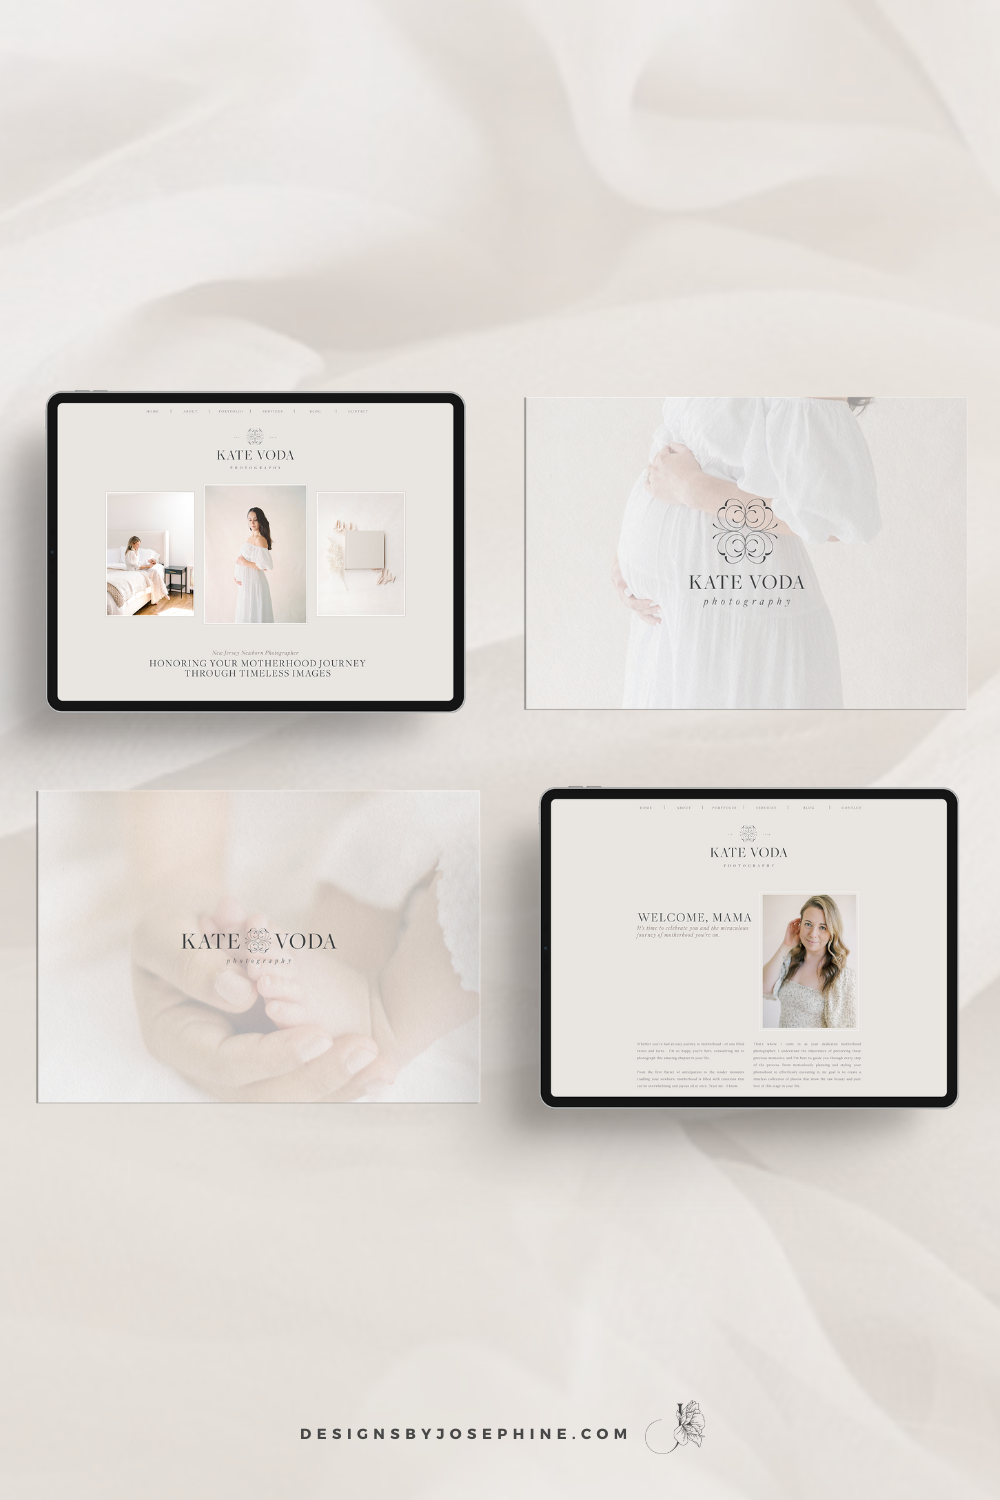 Showit website and branding for a newborn photographer in light and airy colors